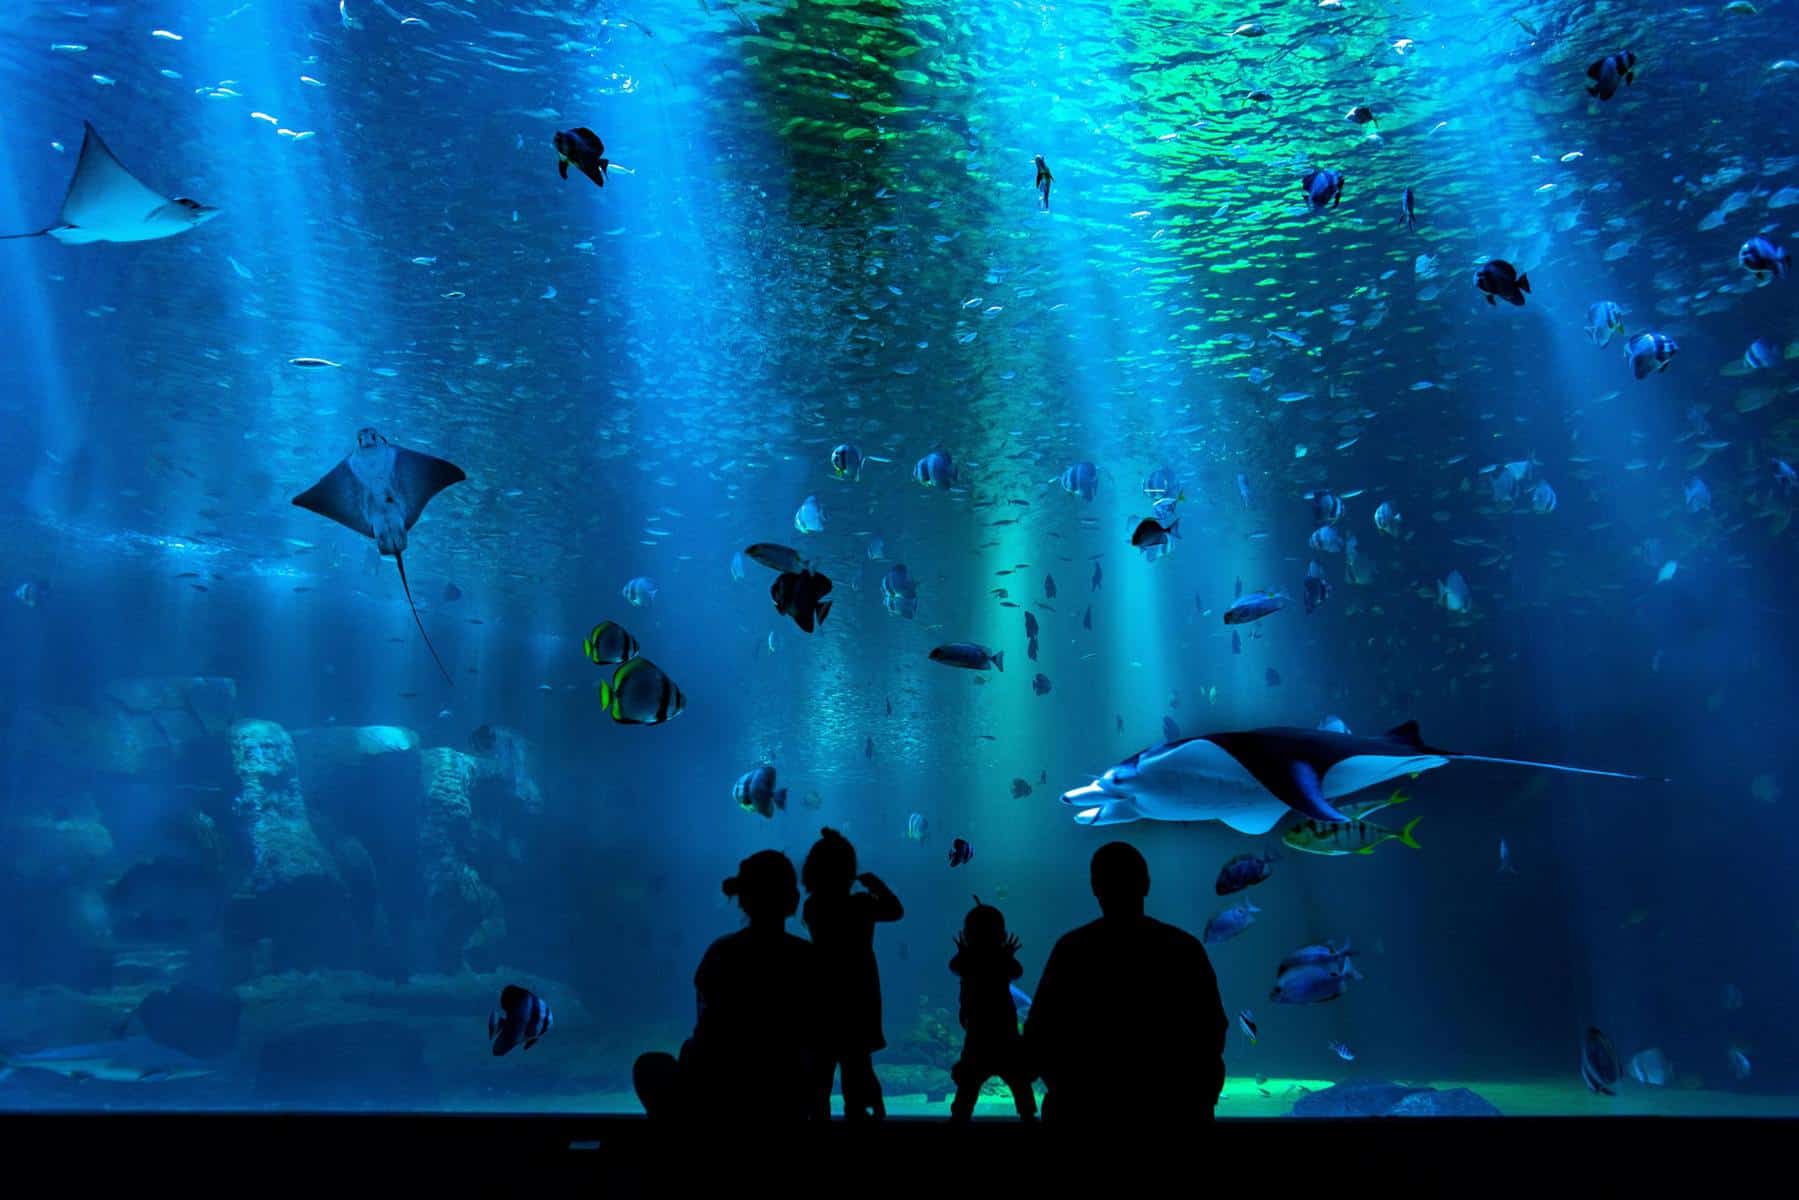 udstødning maske dedikation These are The 15 Largest Aquariums in the World